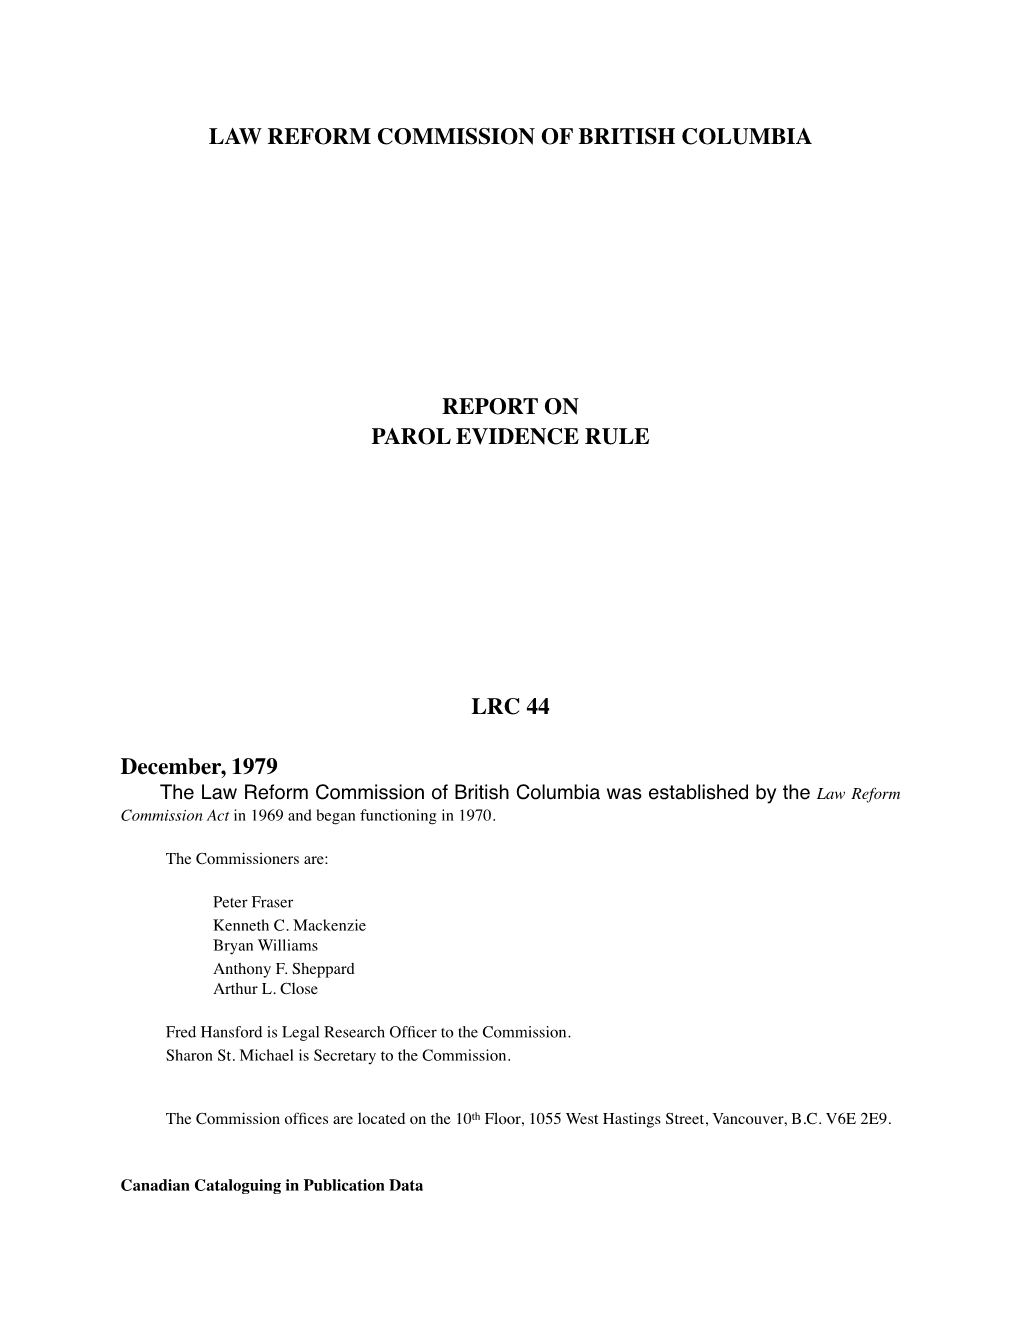 Law Reform Commission of British Columbia Report On